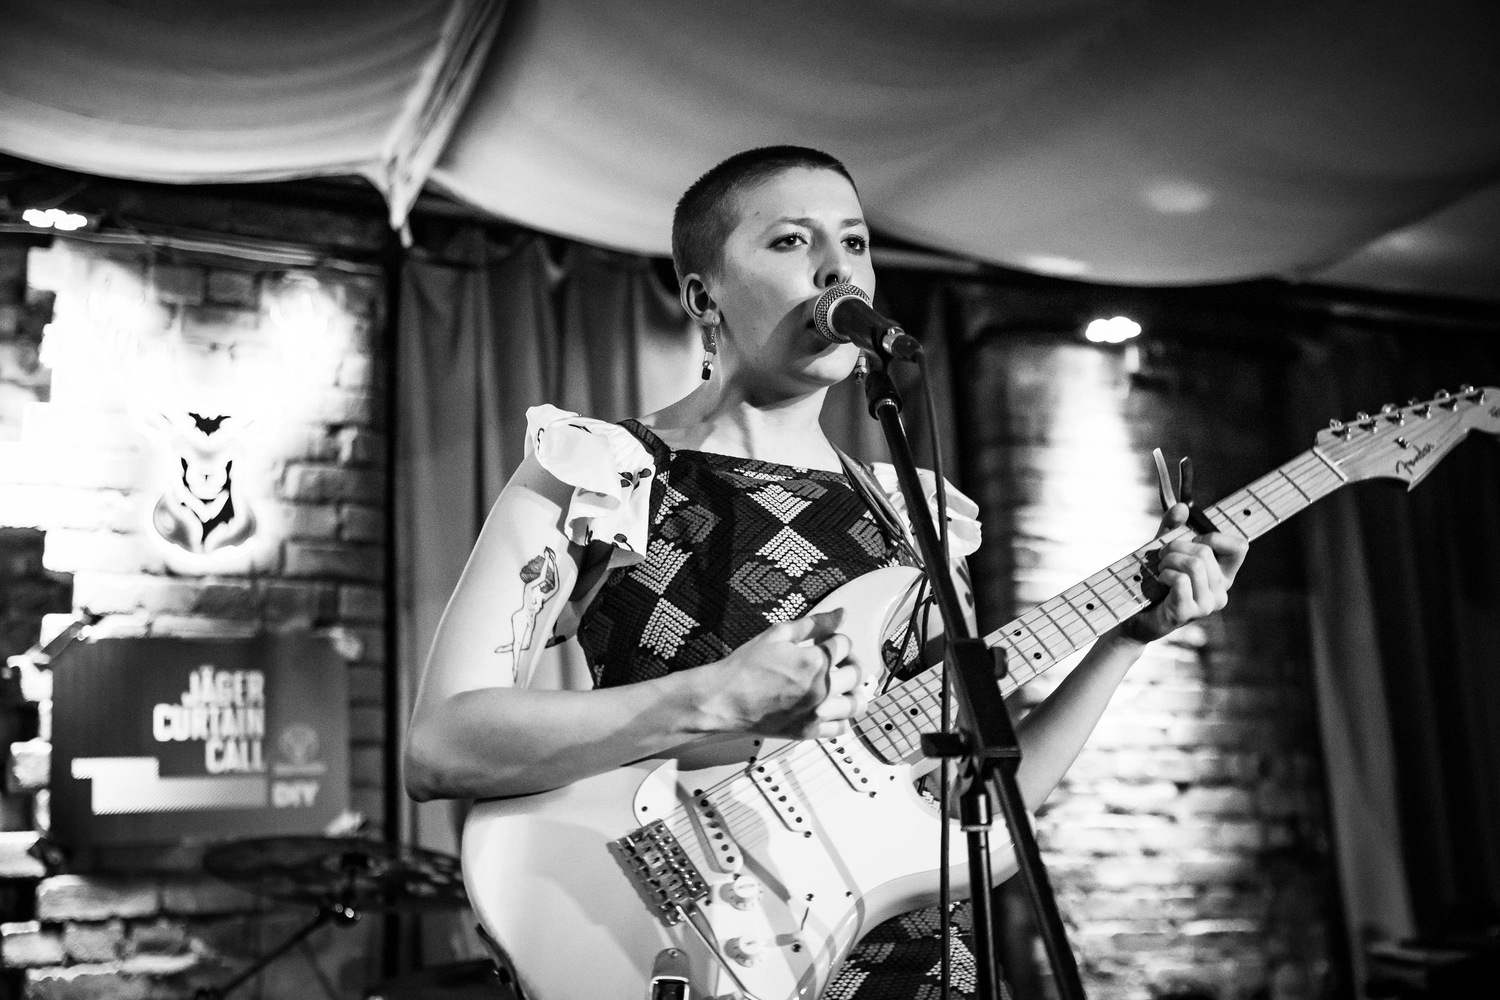 Zuzu brings a sense of fun to her Jäger Curtain Call show at Liverpool’s Phase One